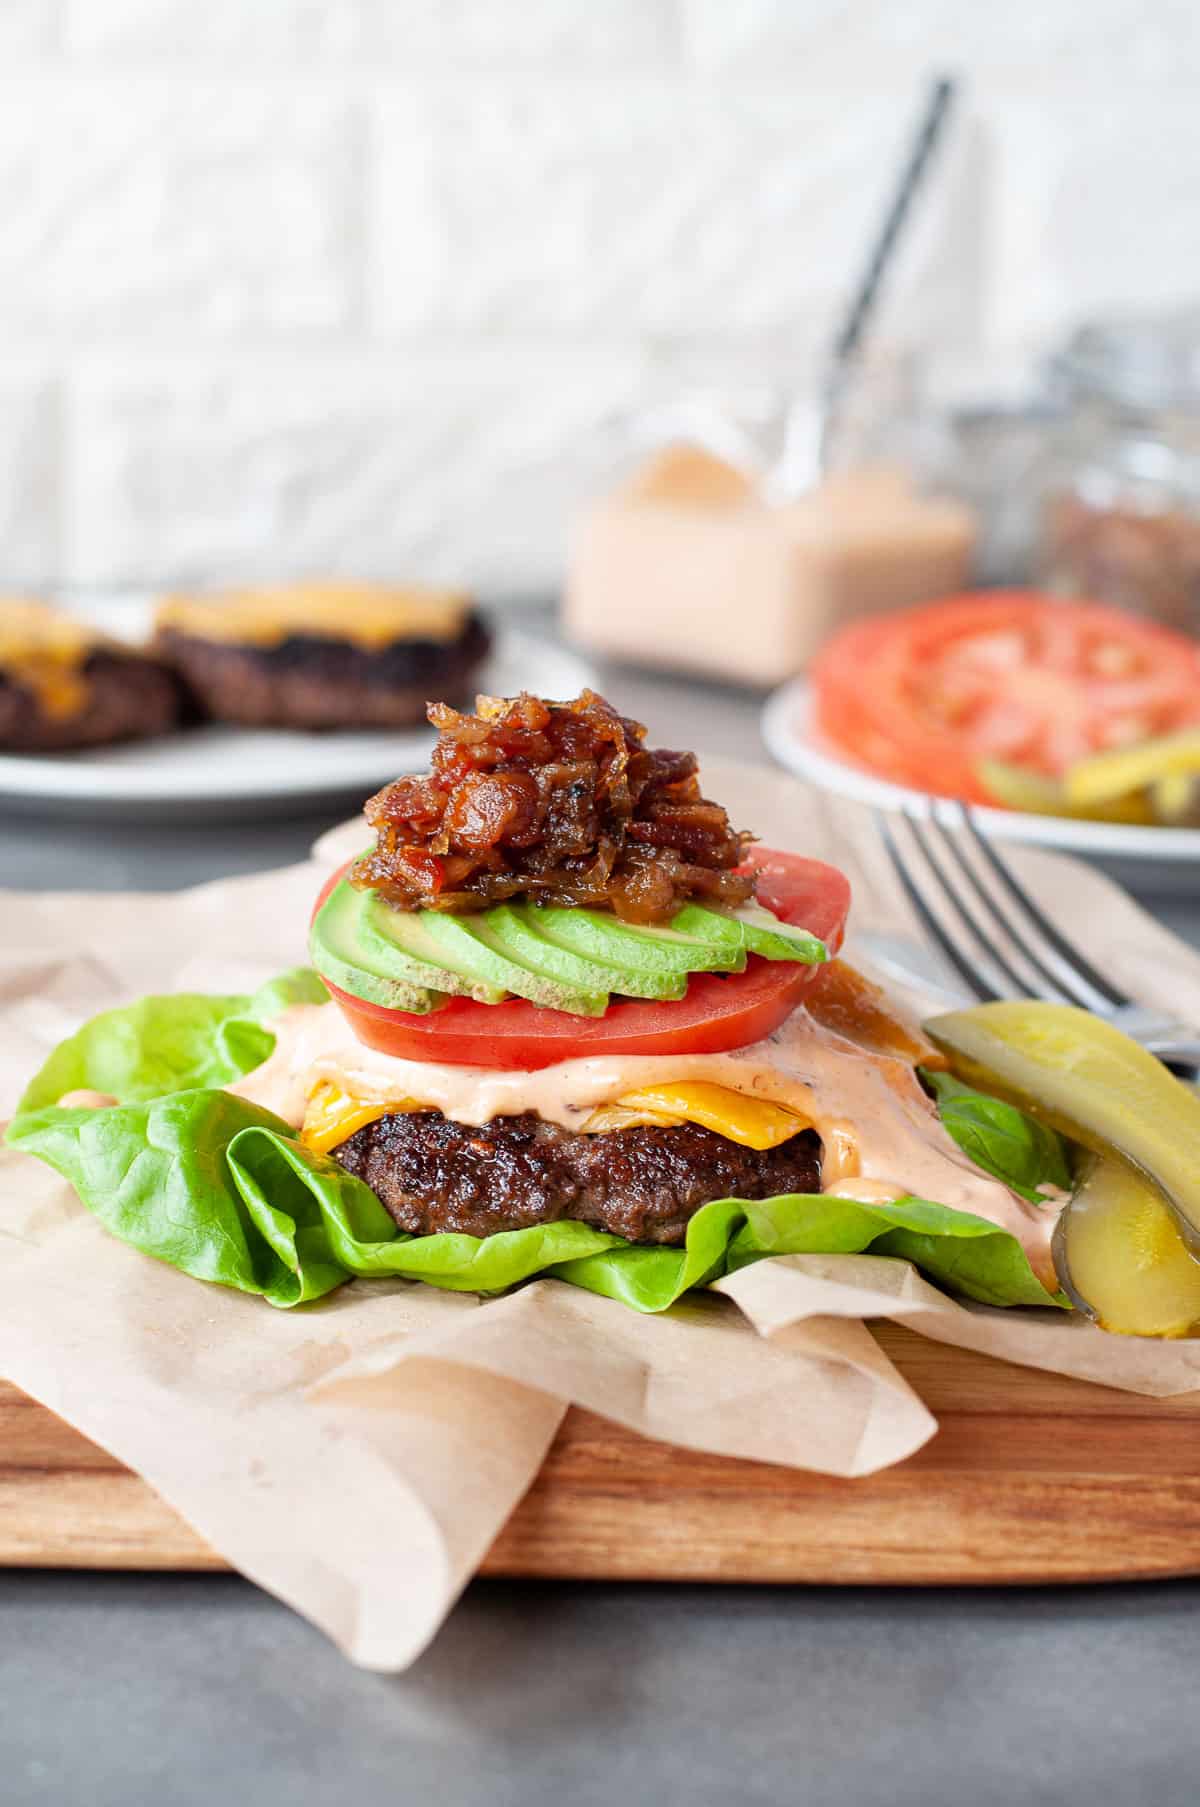 Bunless burger on a bed of lettuce, topped with cheese, sauce, tomato, avocado and bacon jam